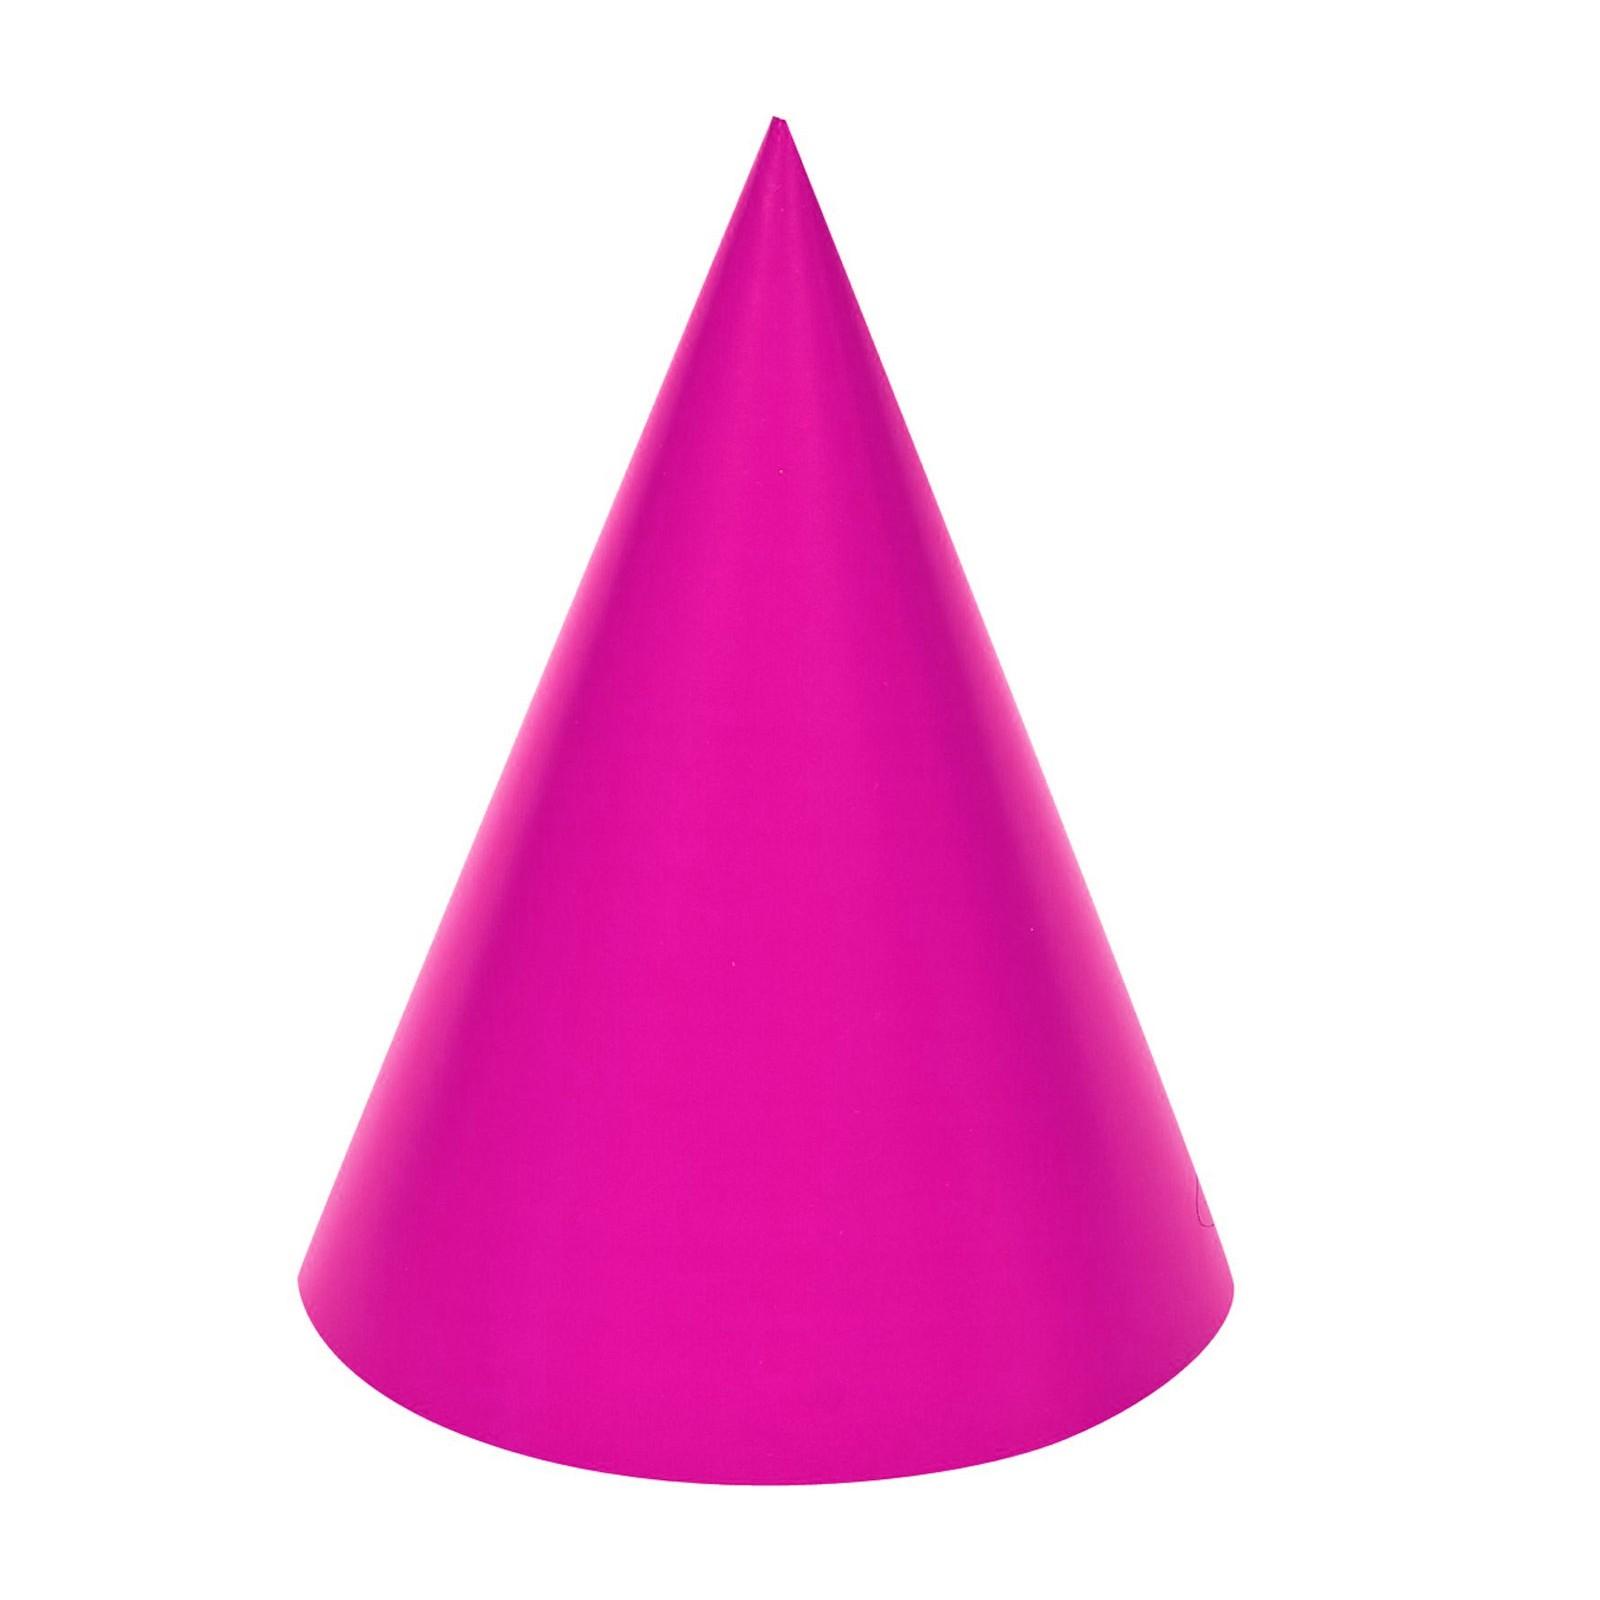 High Resolution Wallpaper | Cone 1600x1600 px